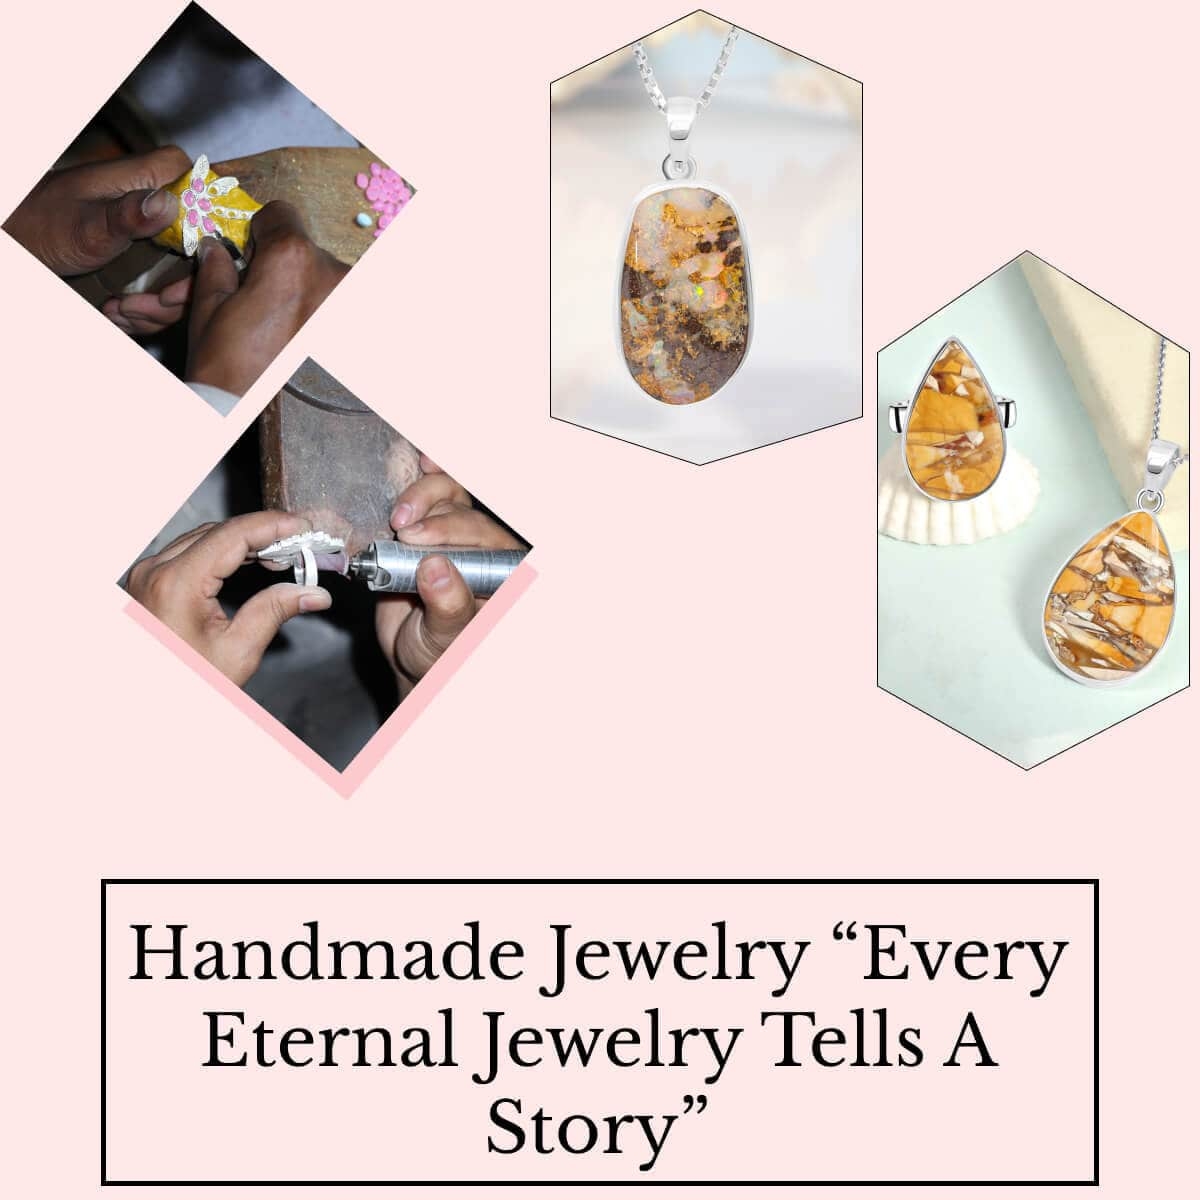 Facts About Handmade Jewelry